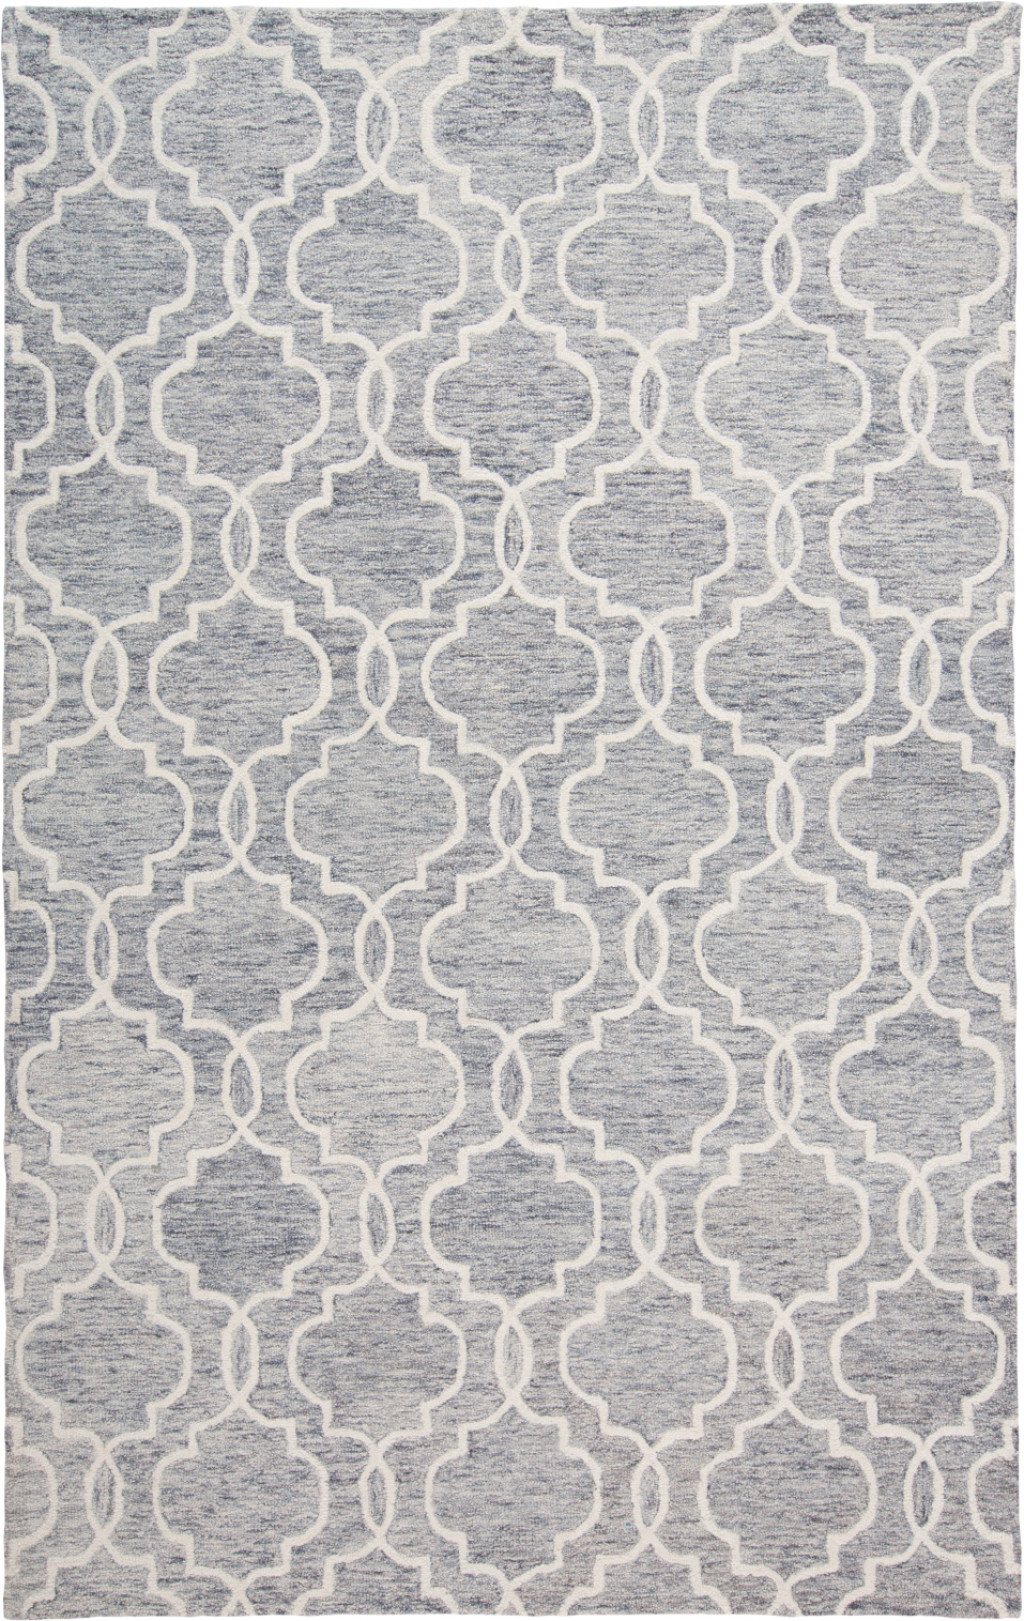 9' X 12' Blue Gray And Ivory Wool Geometric Tufted Handmade Stain Resistant Area Rug-512186-1